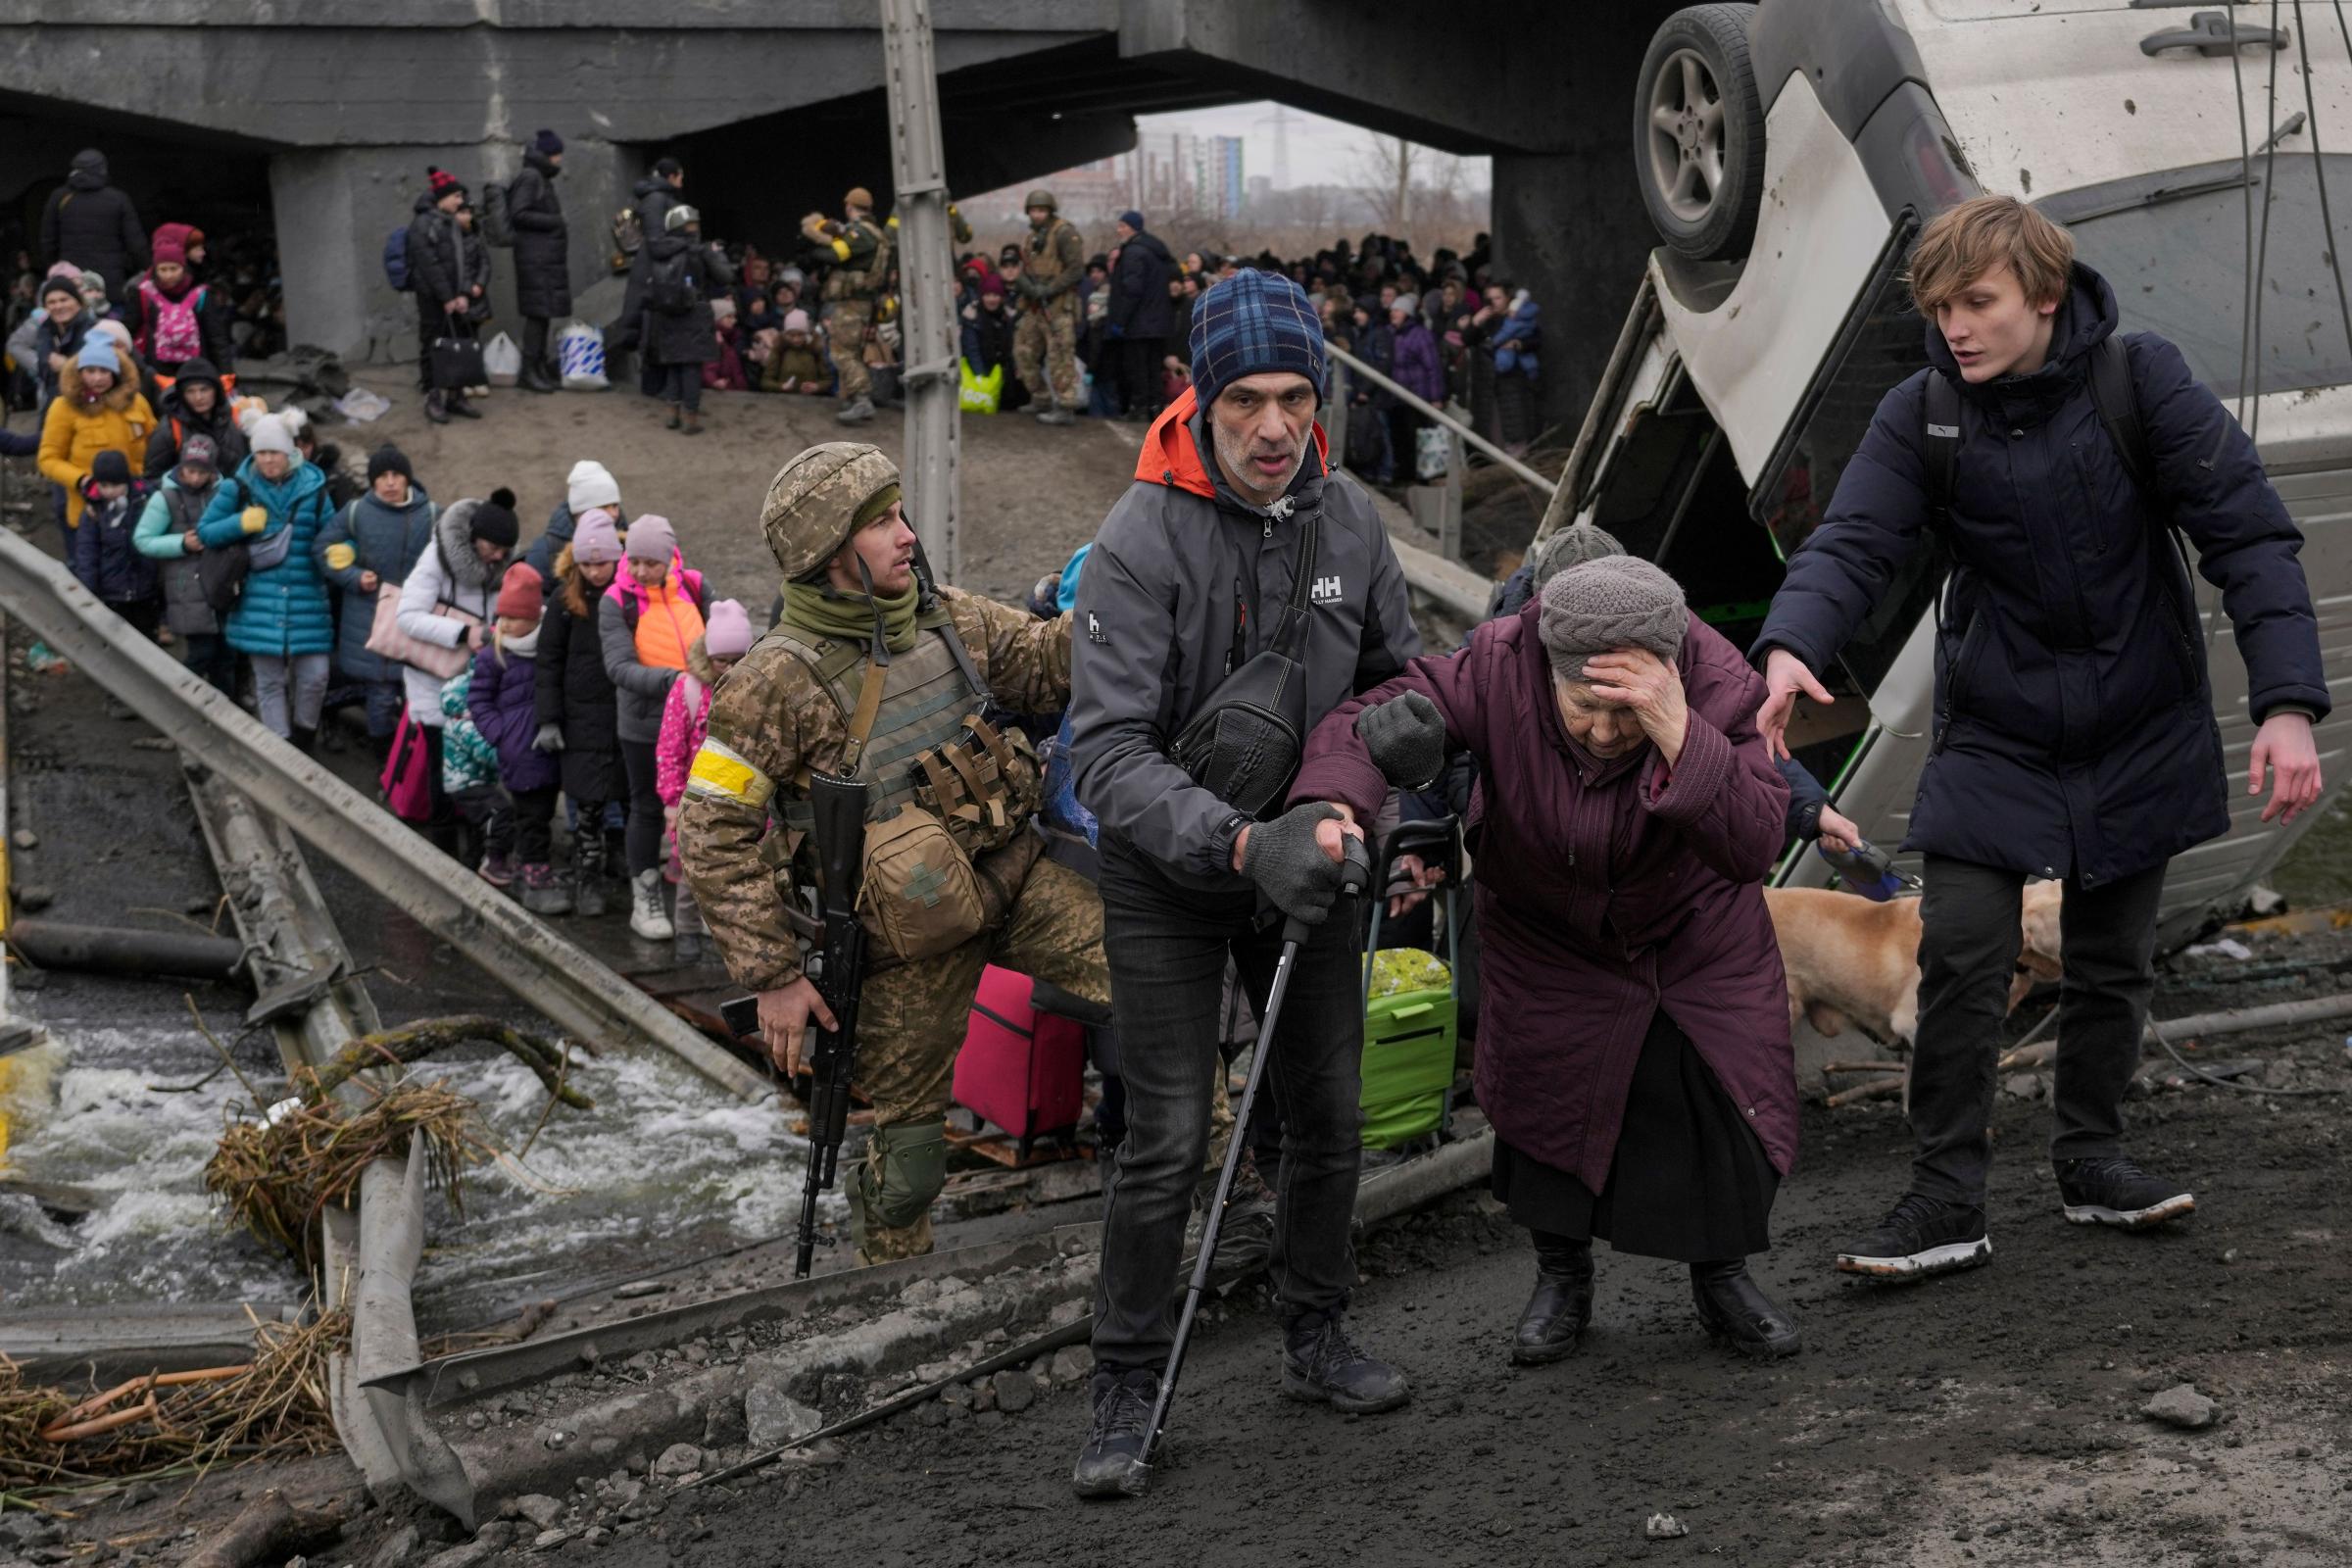 ceasefire attempt in ukraine fails amid russian shelling | central fife times